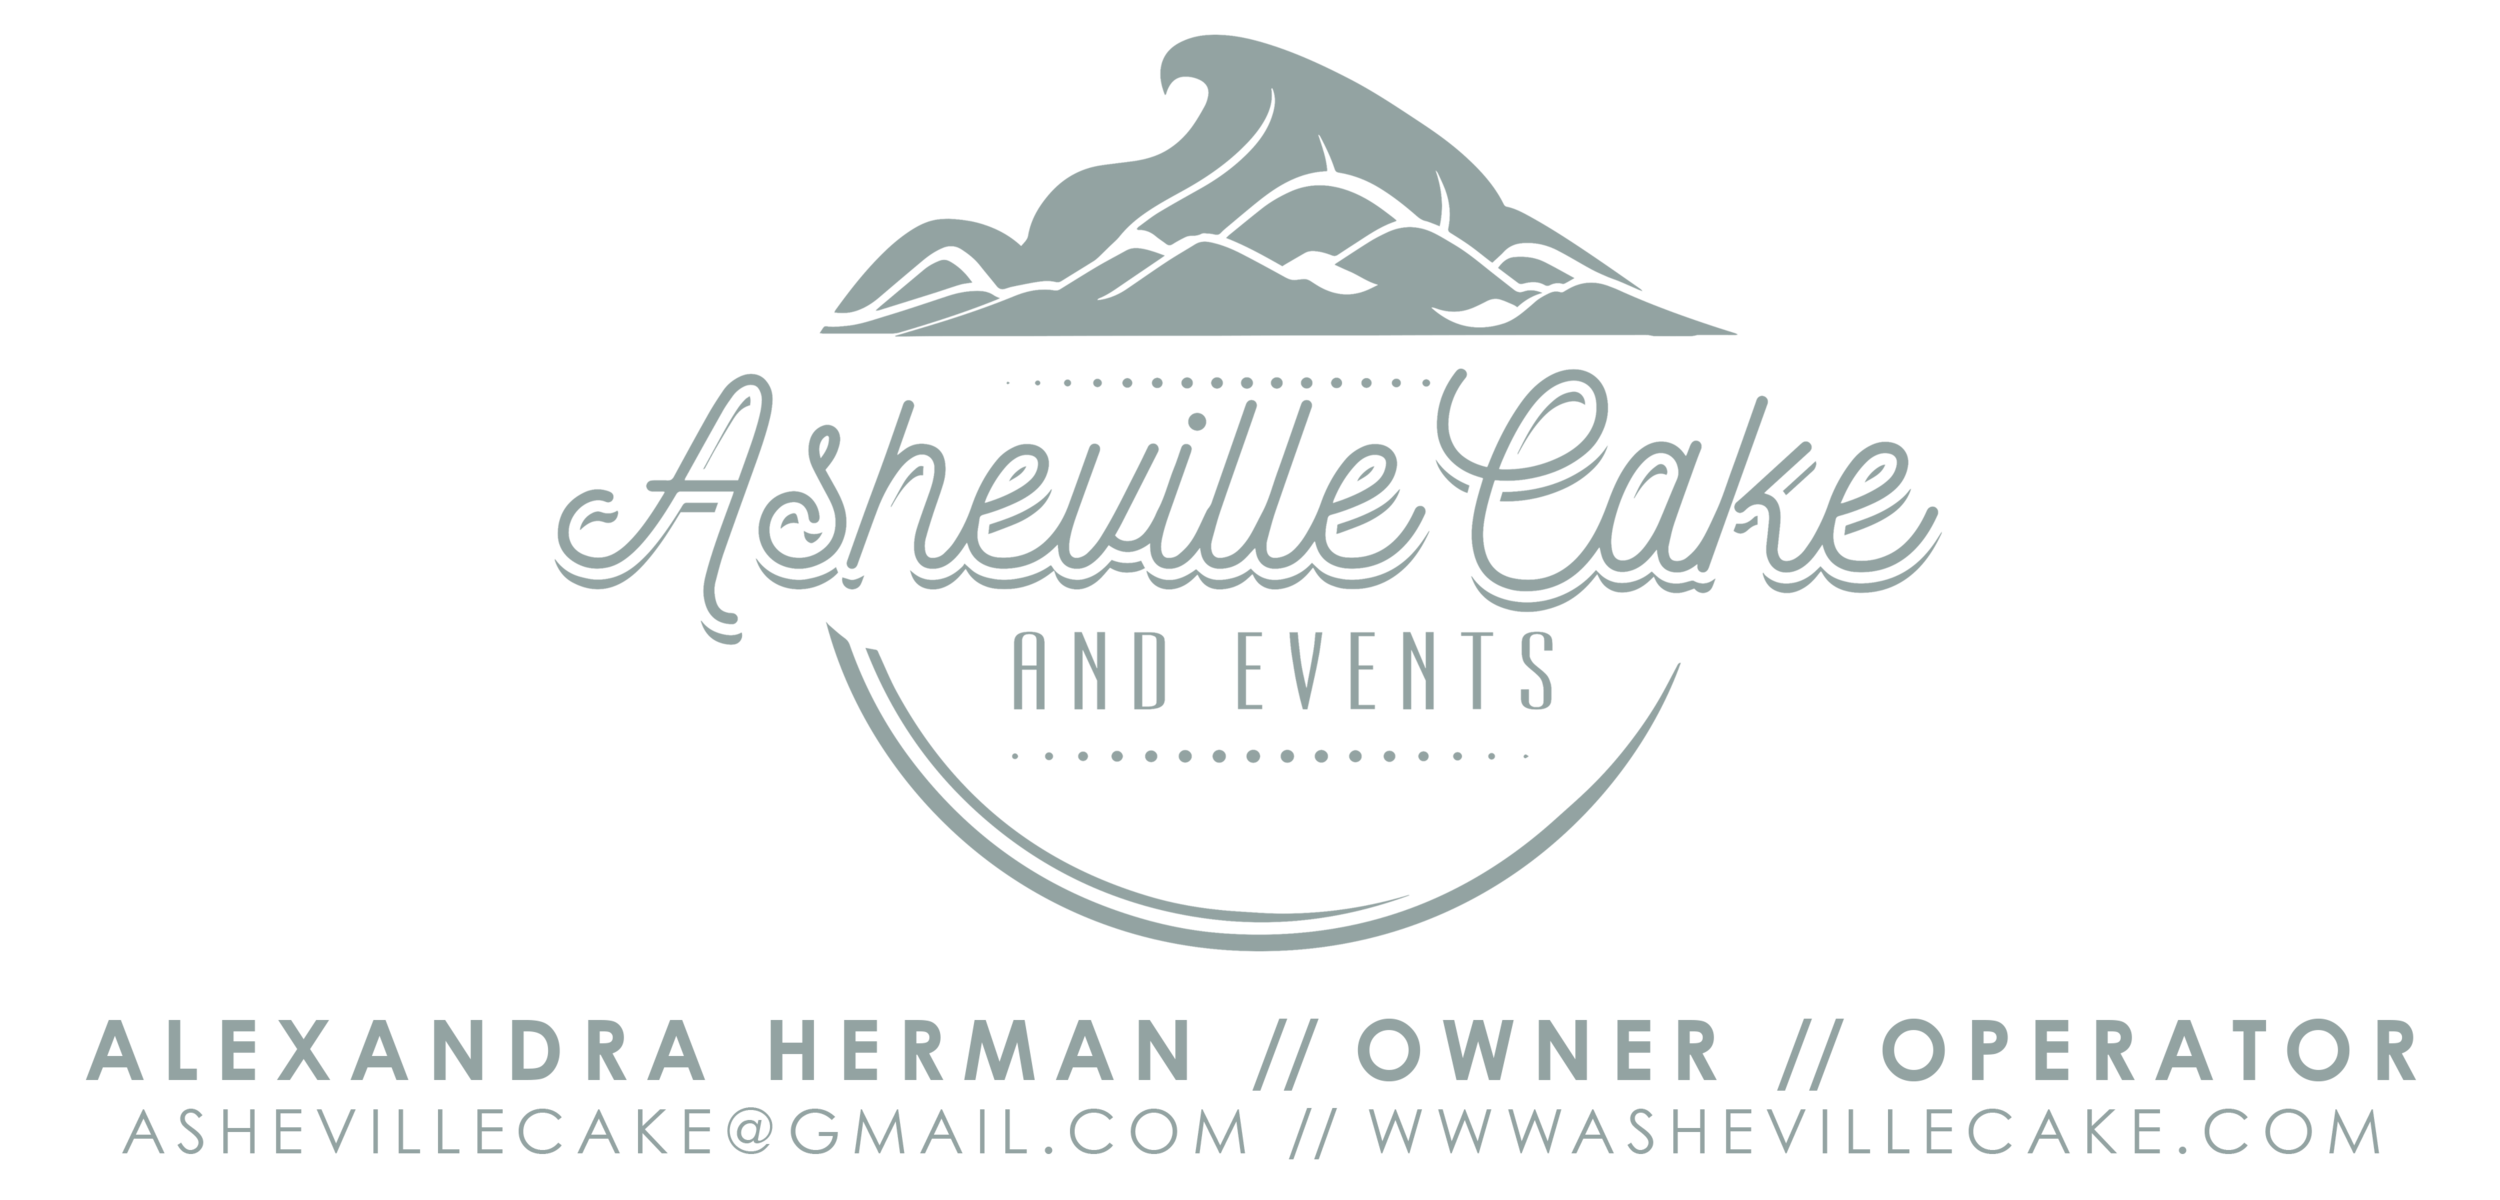 Asheville_Cake_And_Events_INFO.png